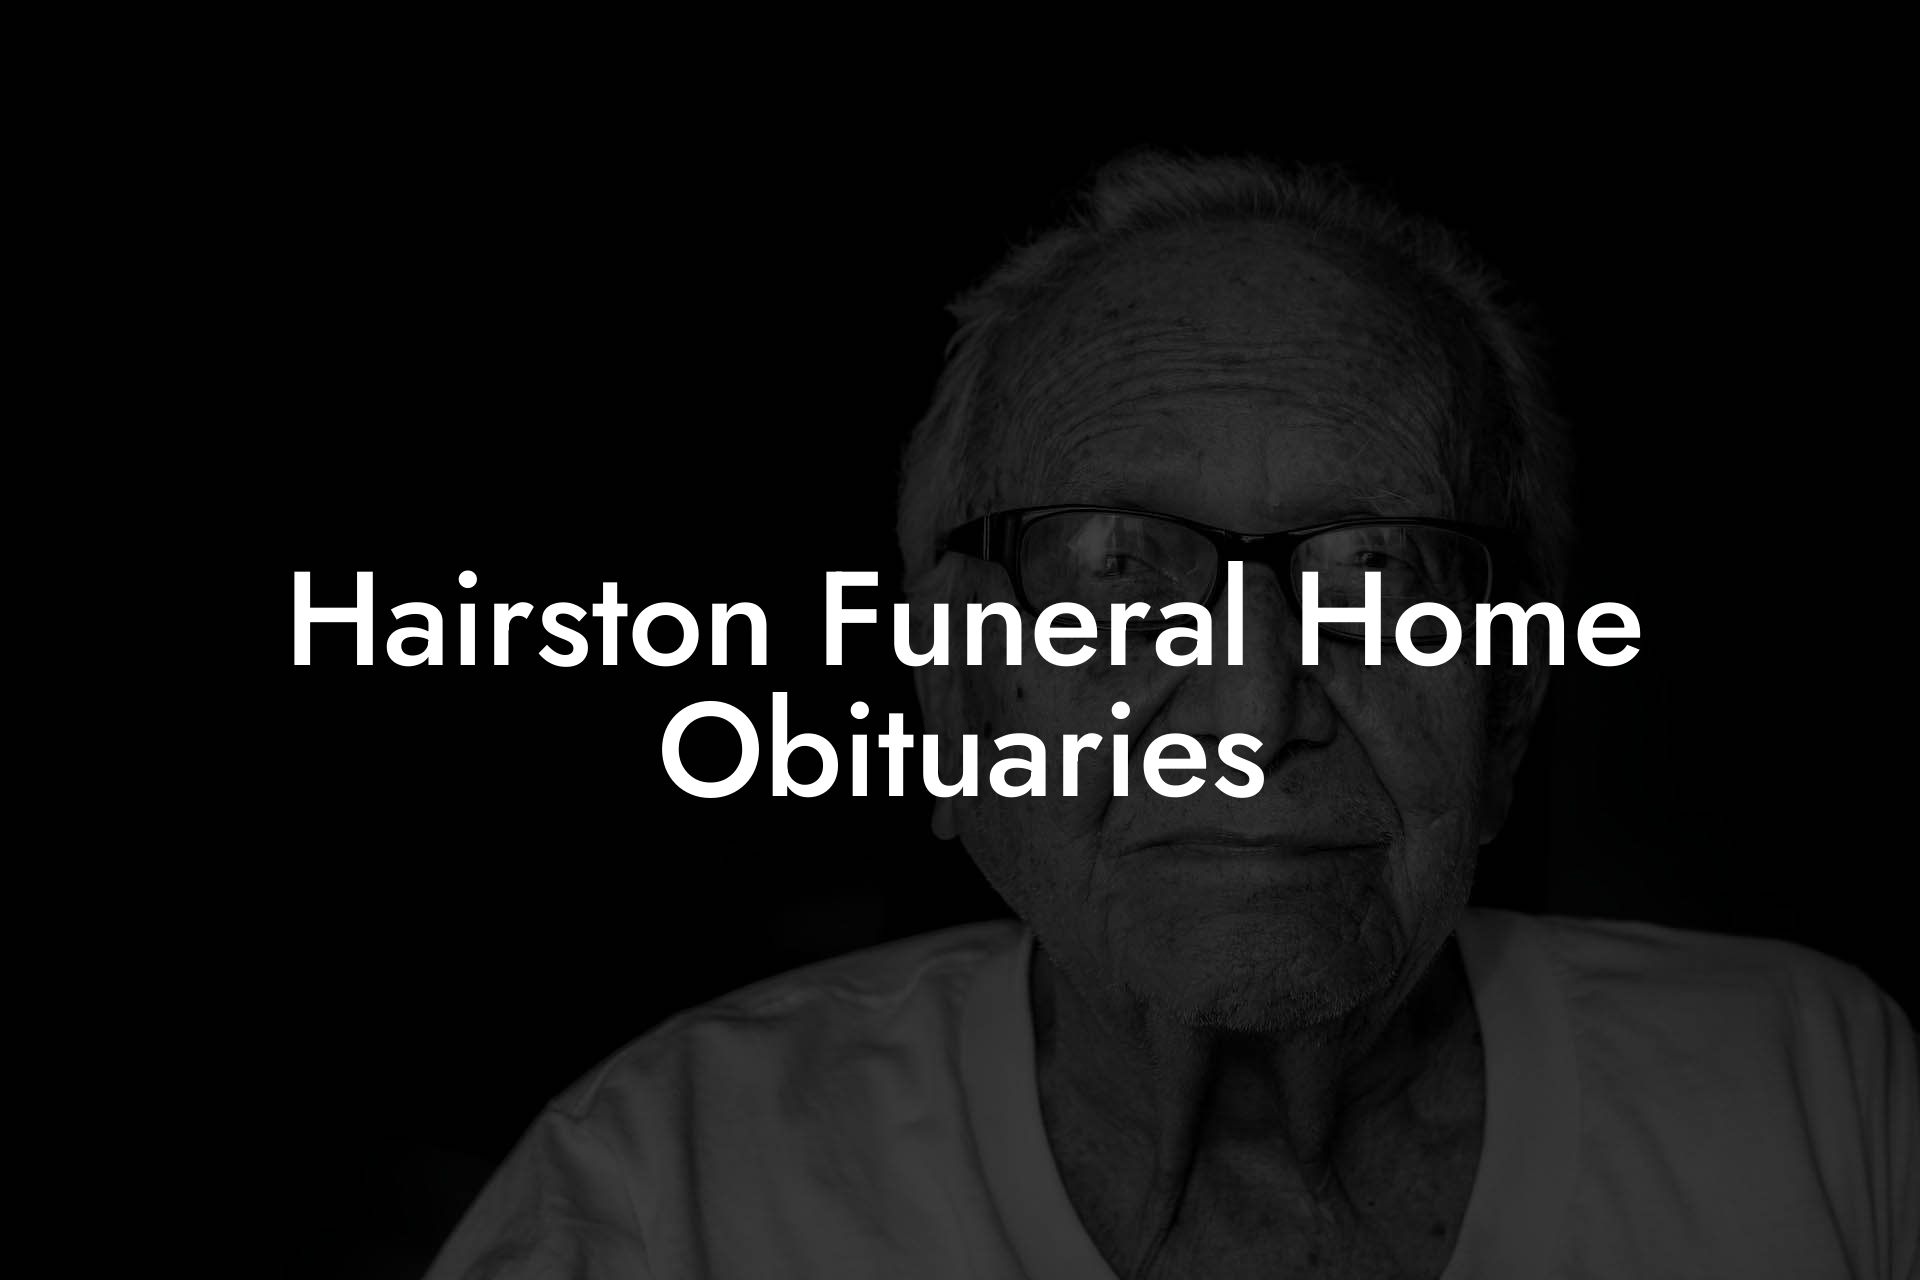 Hairston Funeral Home Obituaries